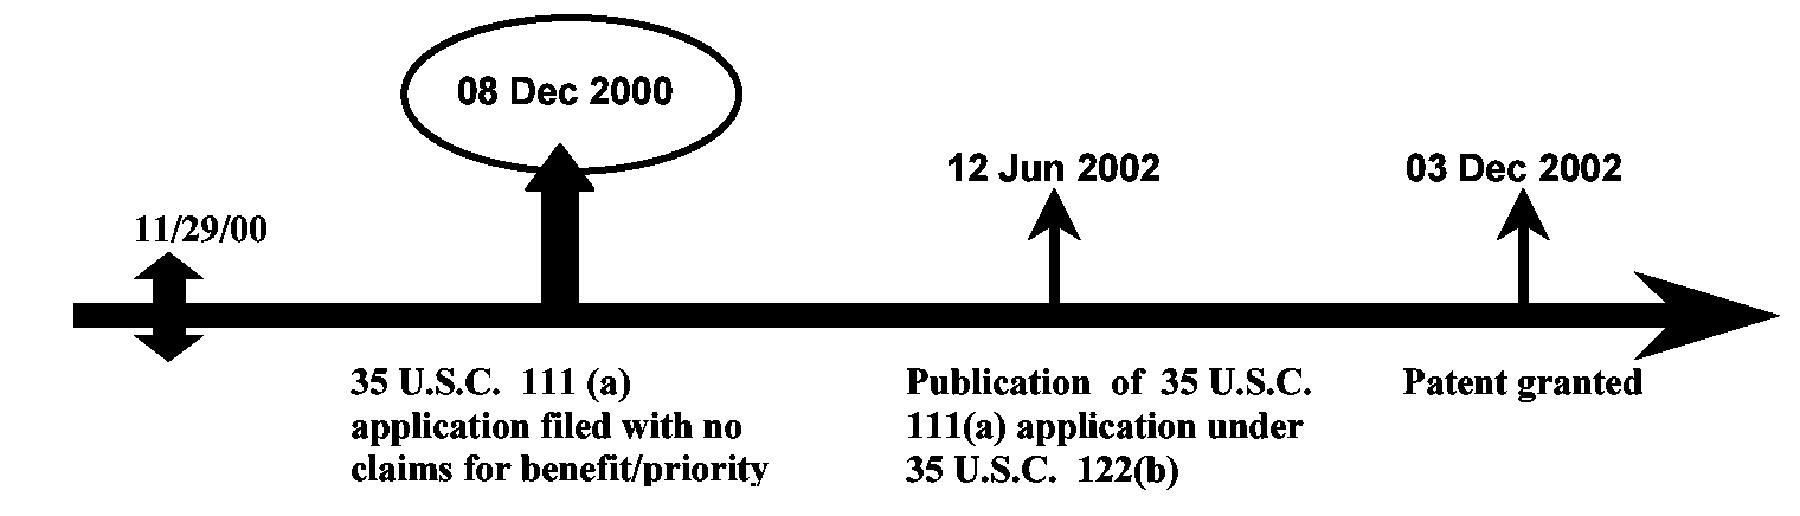 Example 1: Reference Publication and Patent of 35 U.S.C. 111(a) Application with no Priority/Benefit Claims.